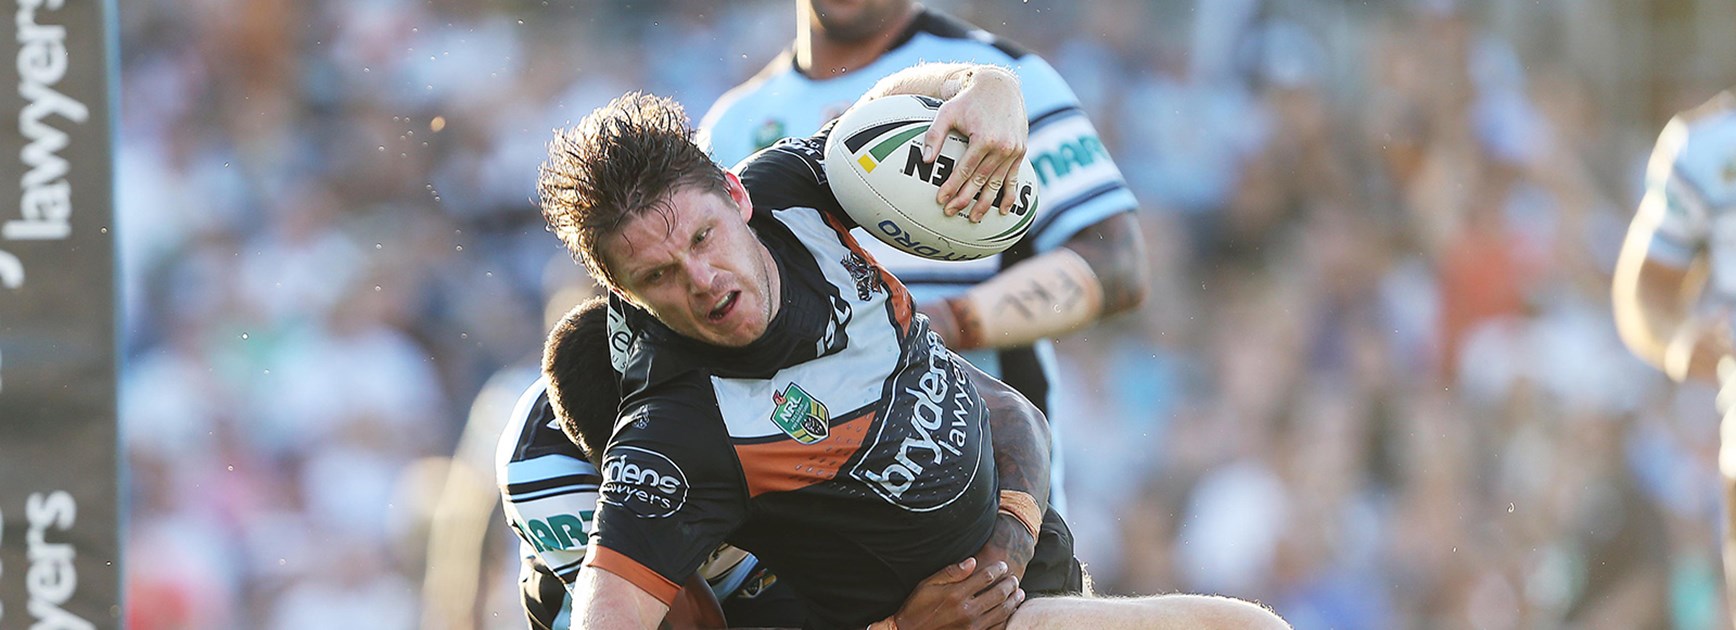 Wests Tigers forward Chris Lawrence in action against the Sharks in Round 5 of the Telstra Premiership.